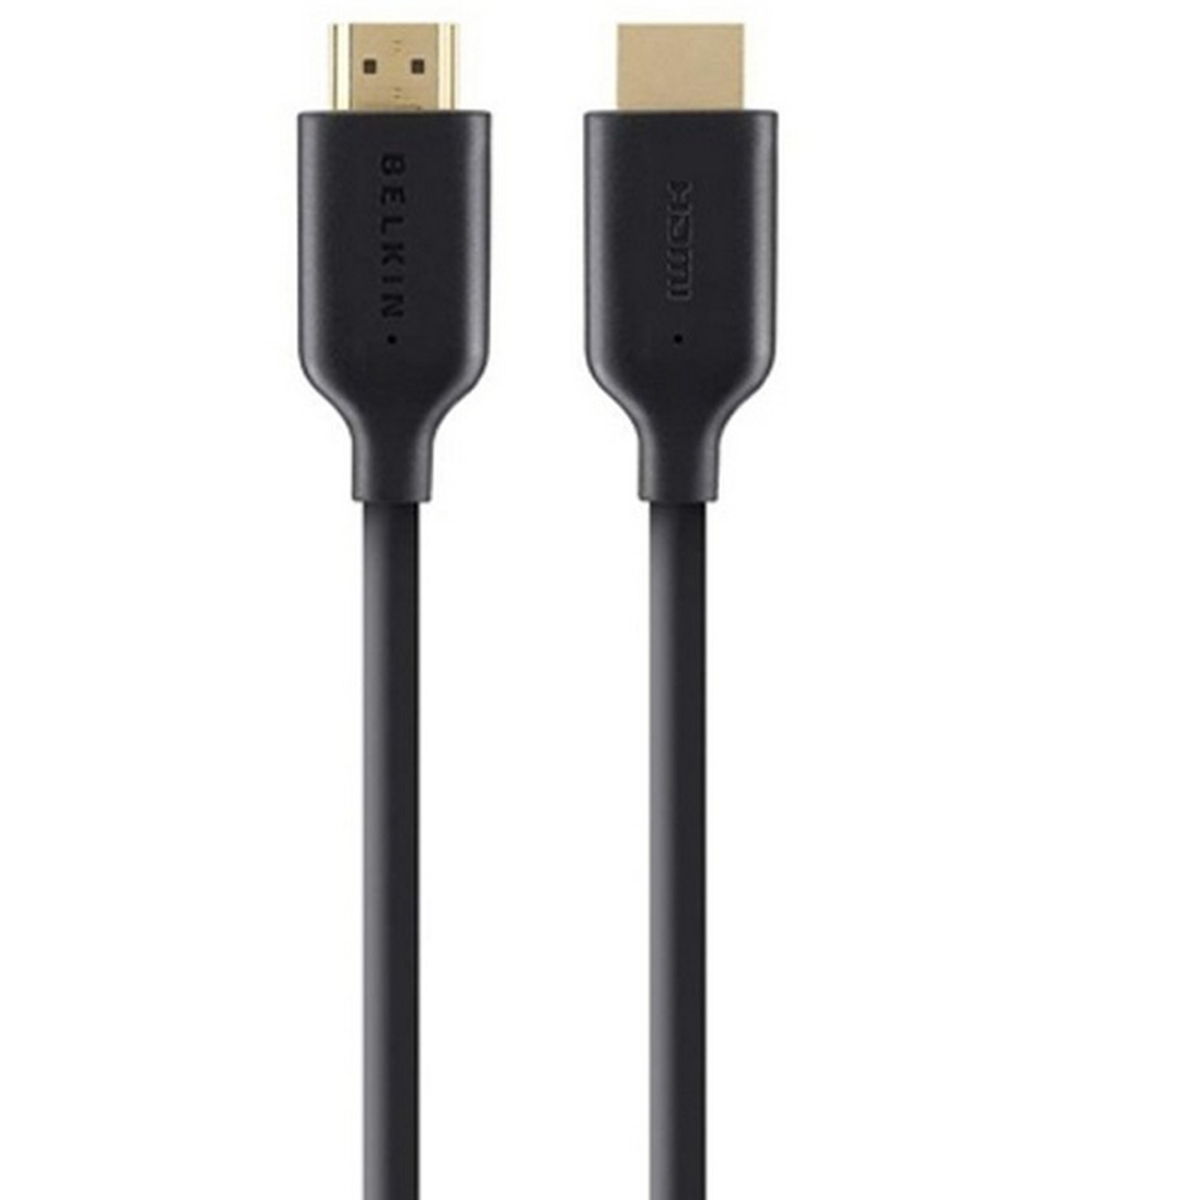 Belkin HDMI With Ethernet Cable F3Y021QE 5mtr